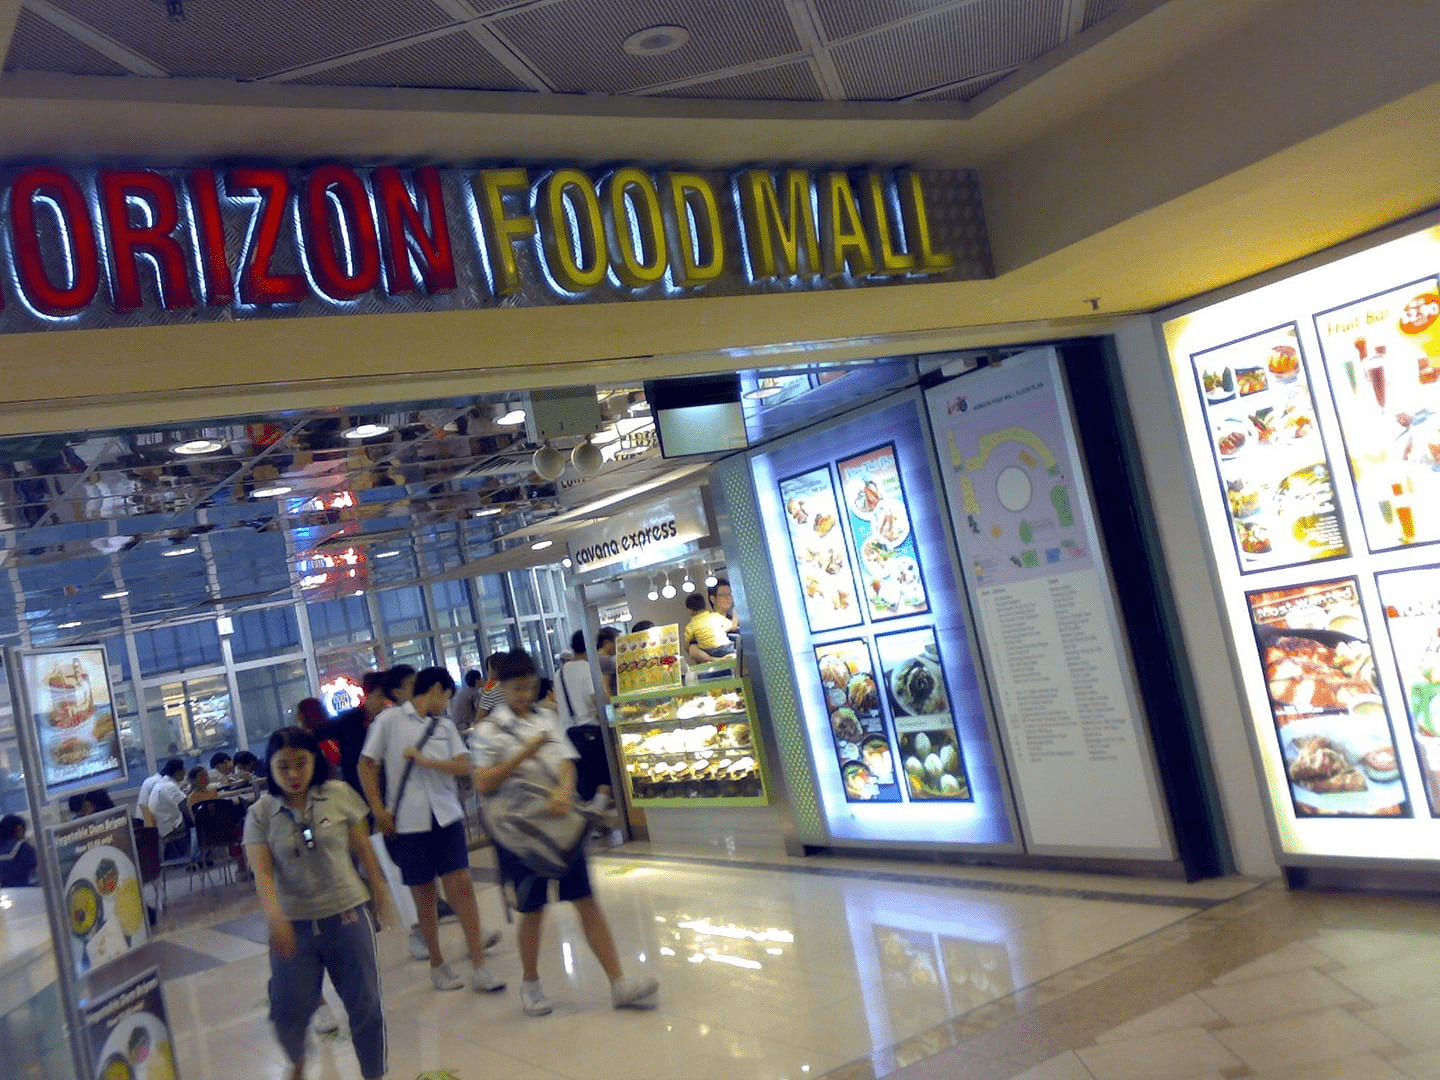 Horizon Food Mall in Old Causeway Point